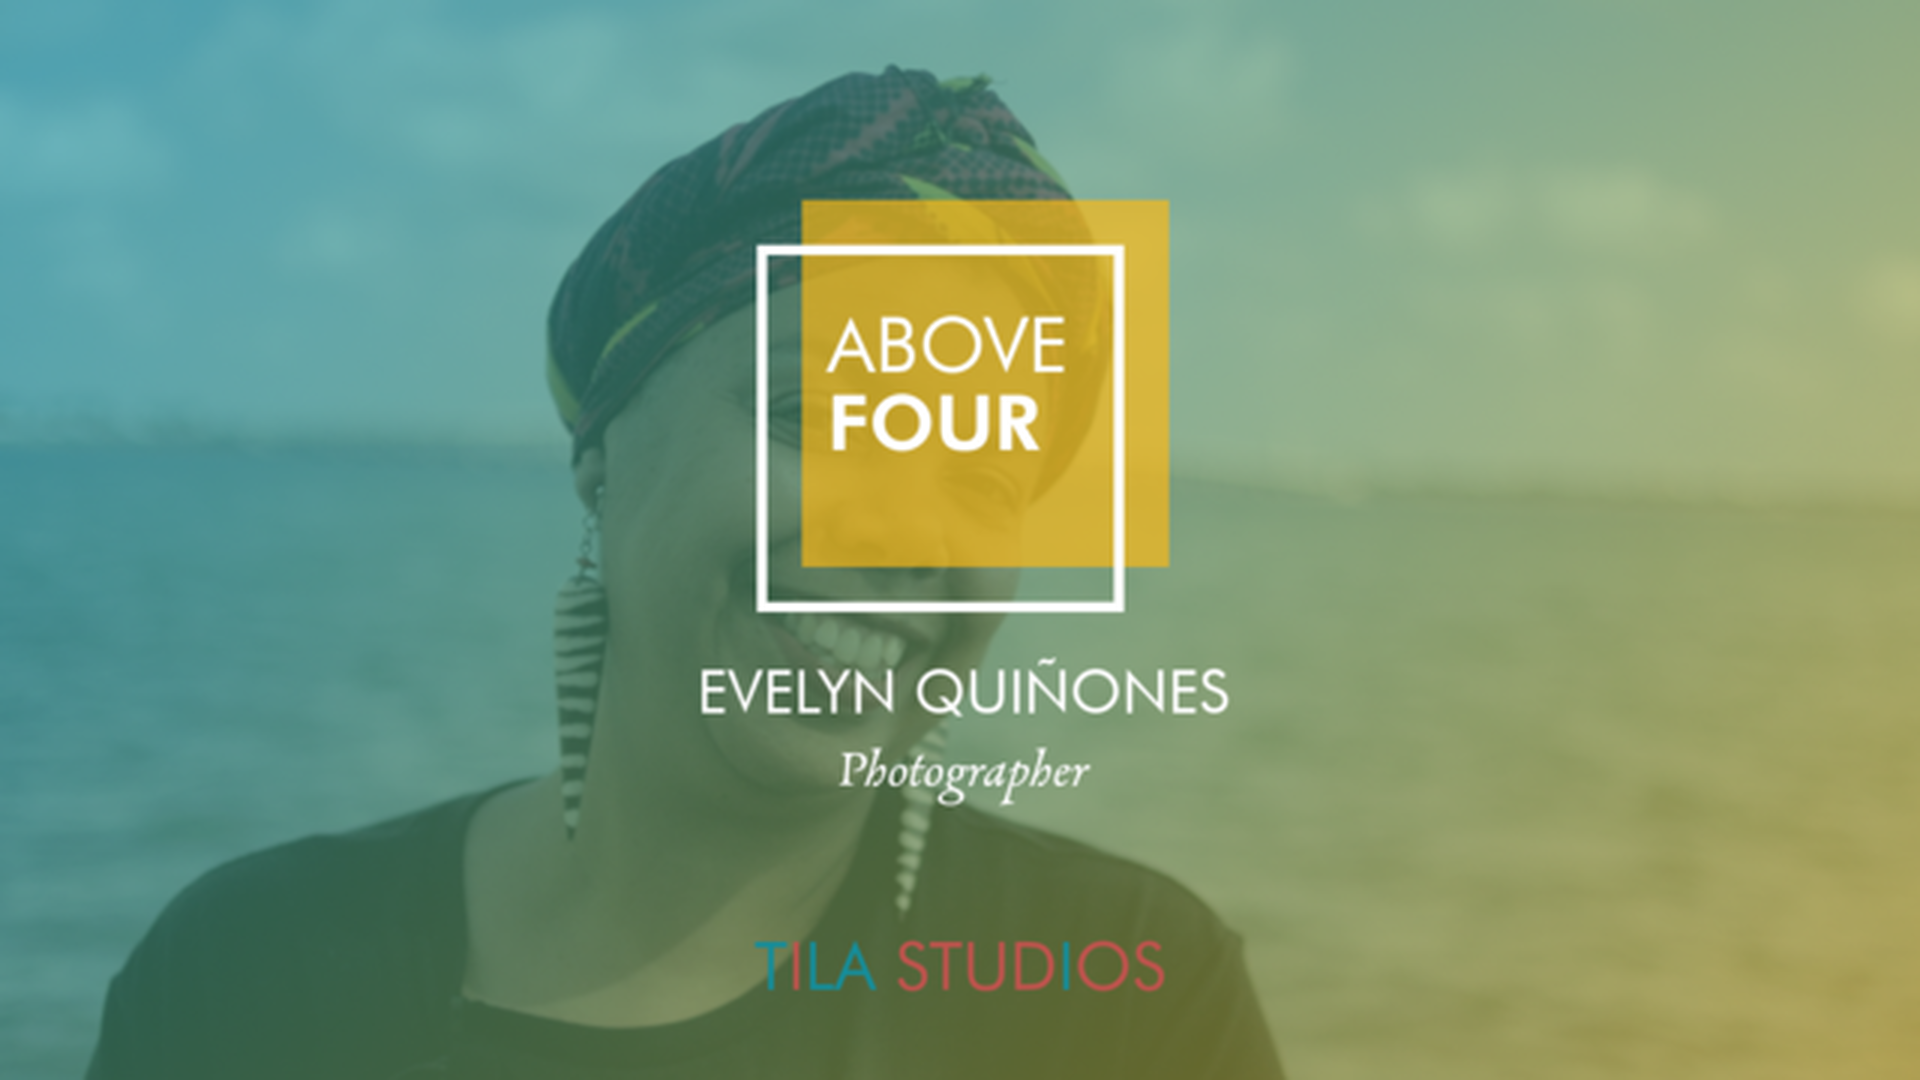 Above Four: Evelyn Quiñones on Capturing Life in the Moment